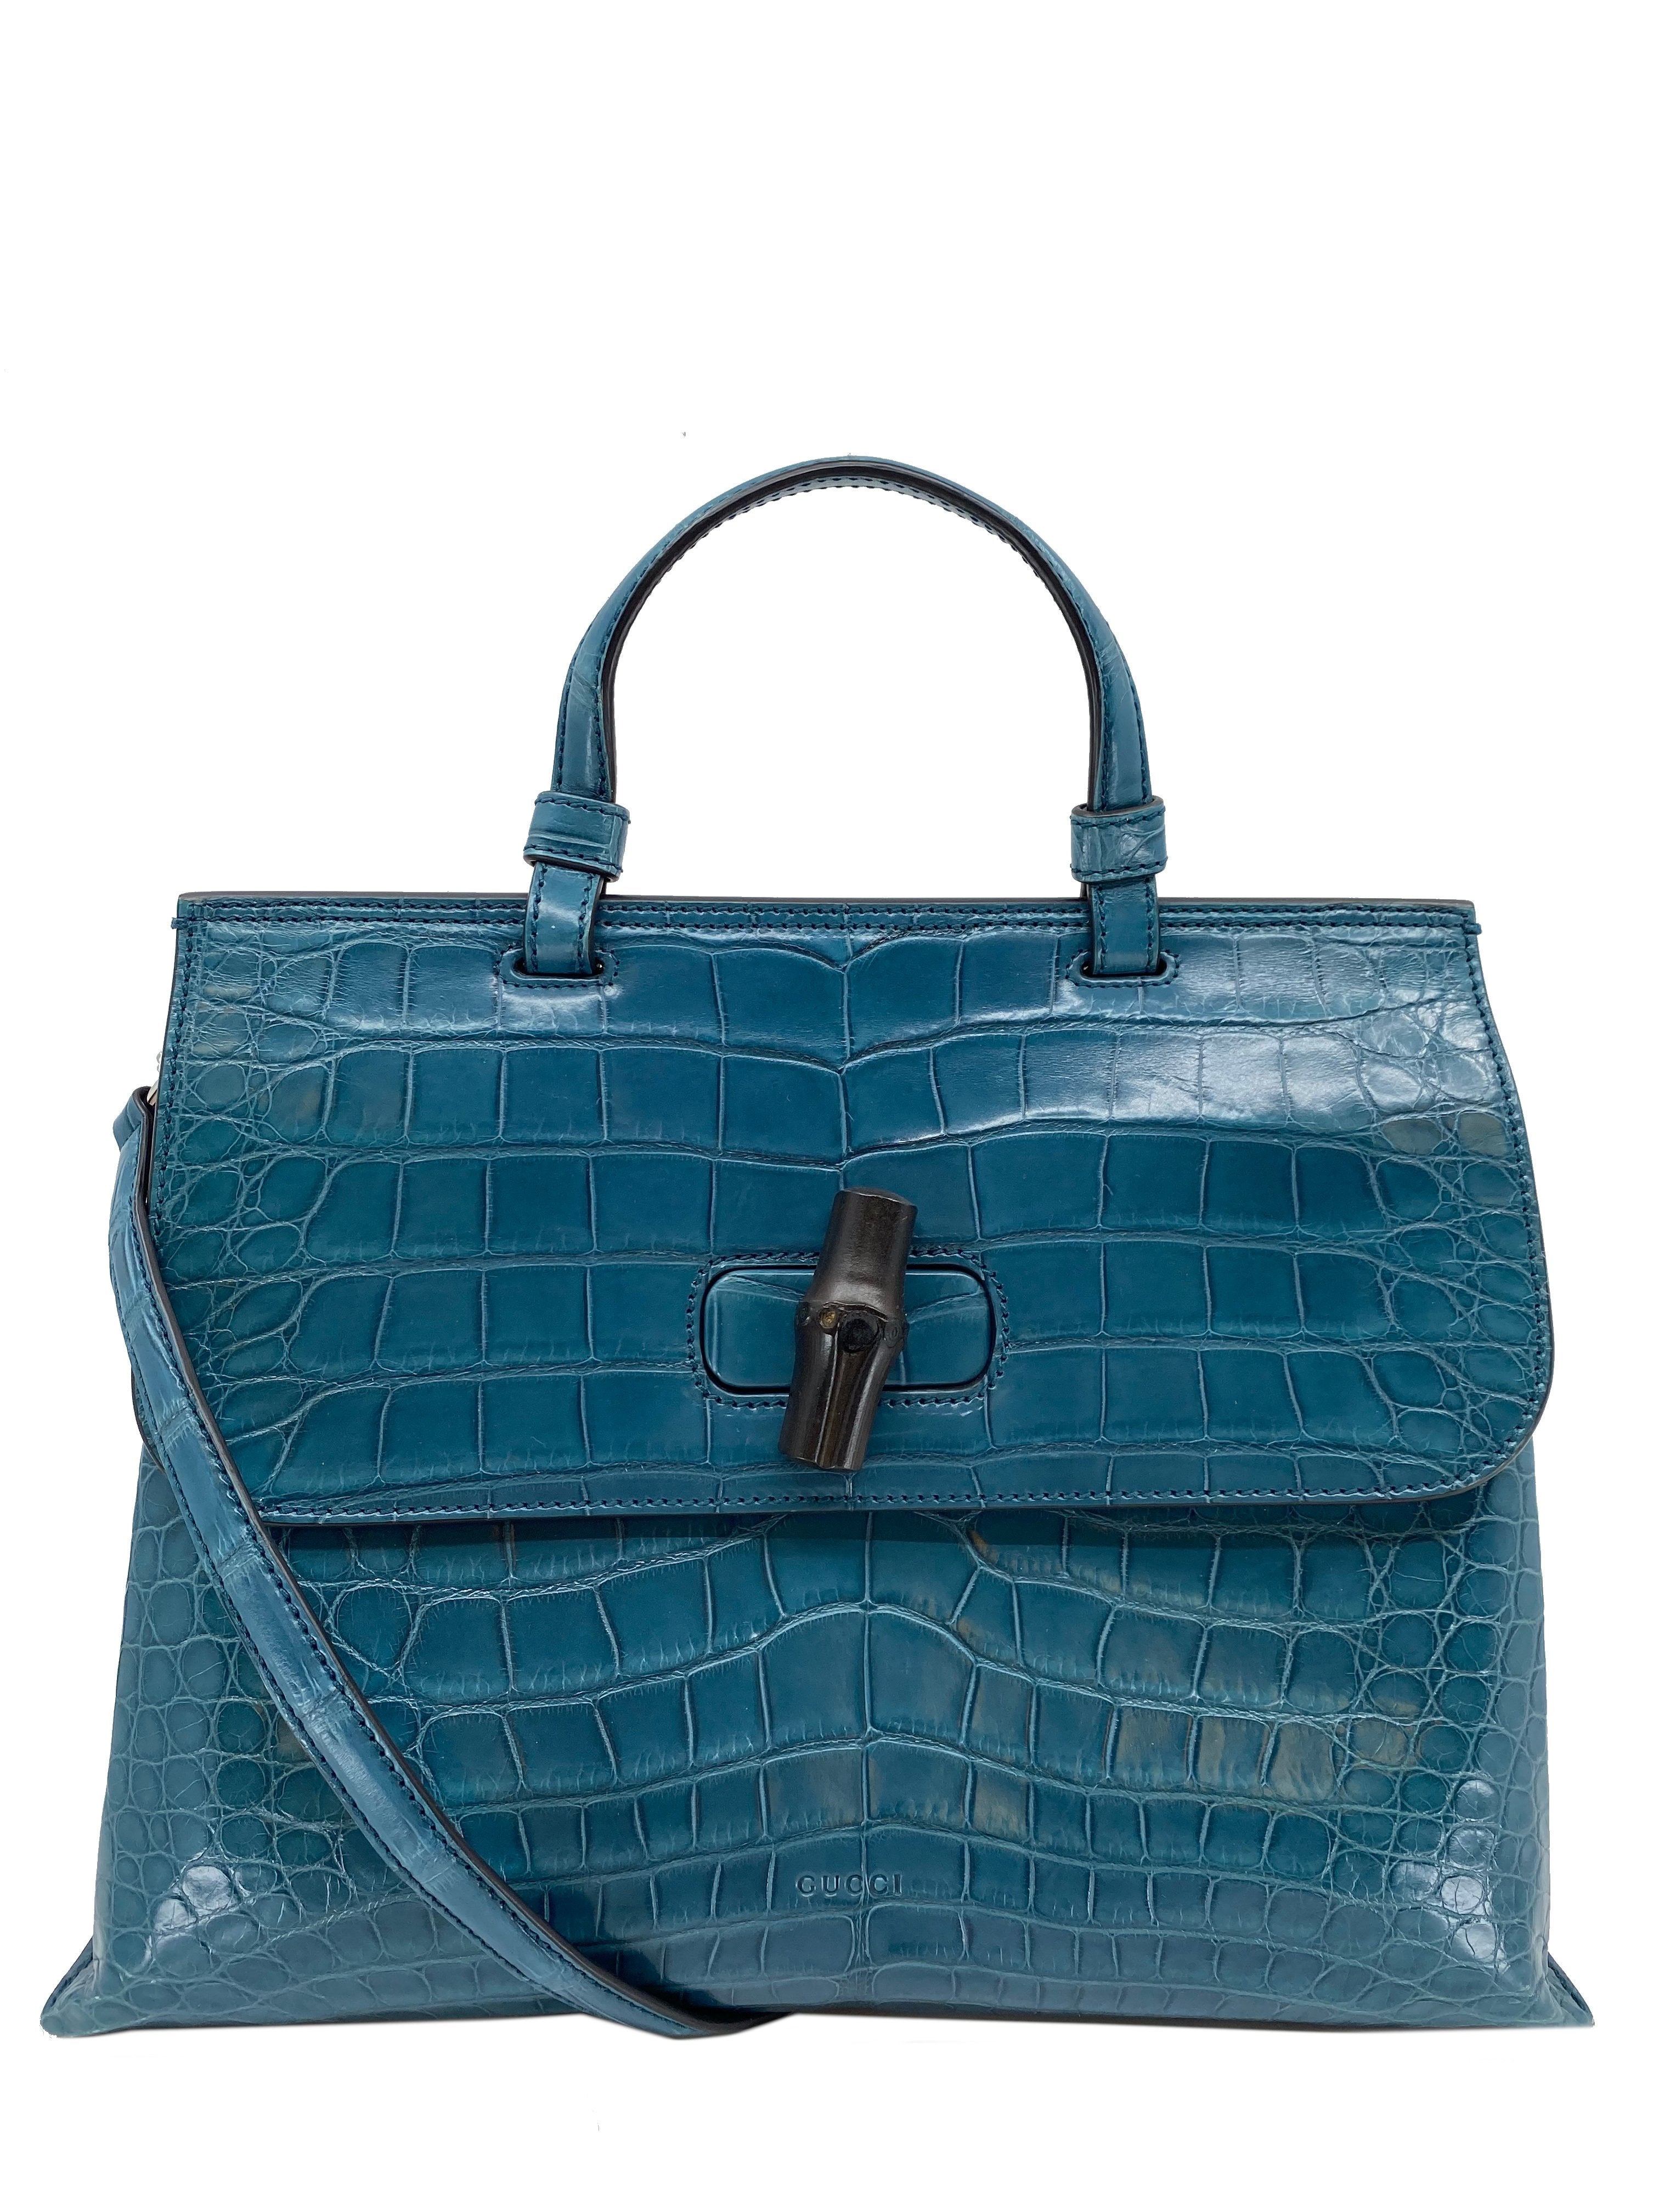 Gucci Bamboo 1947 small top handle bag in blue leather